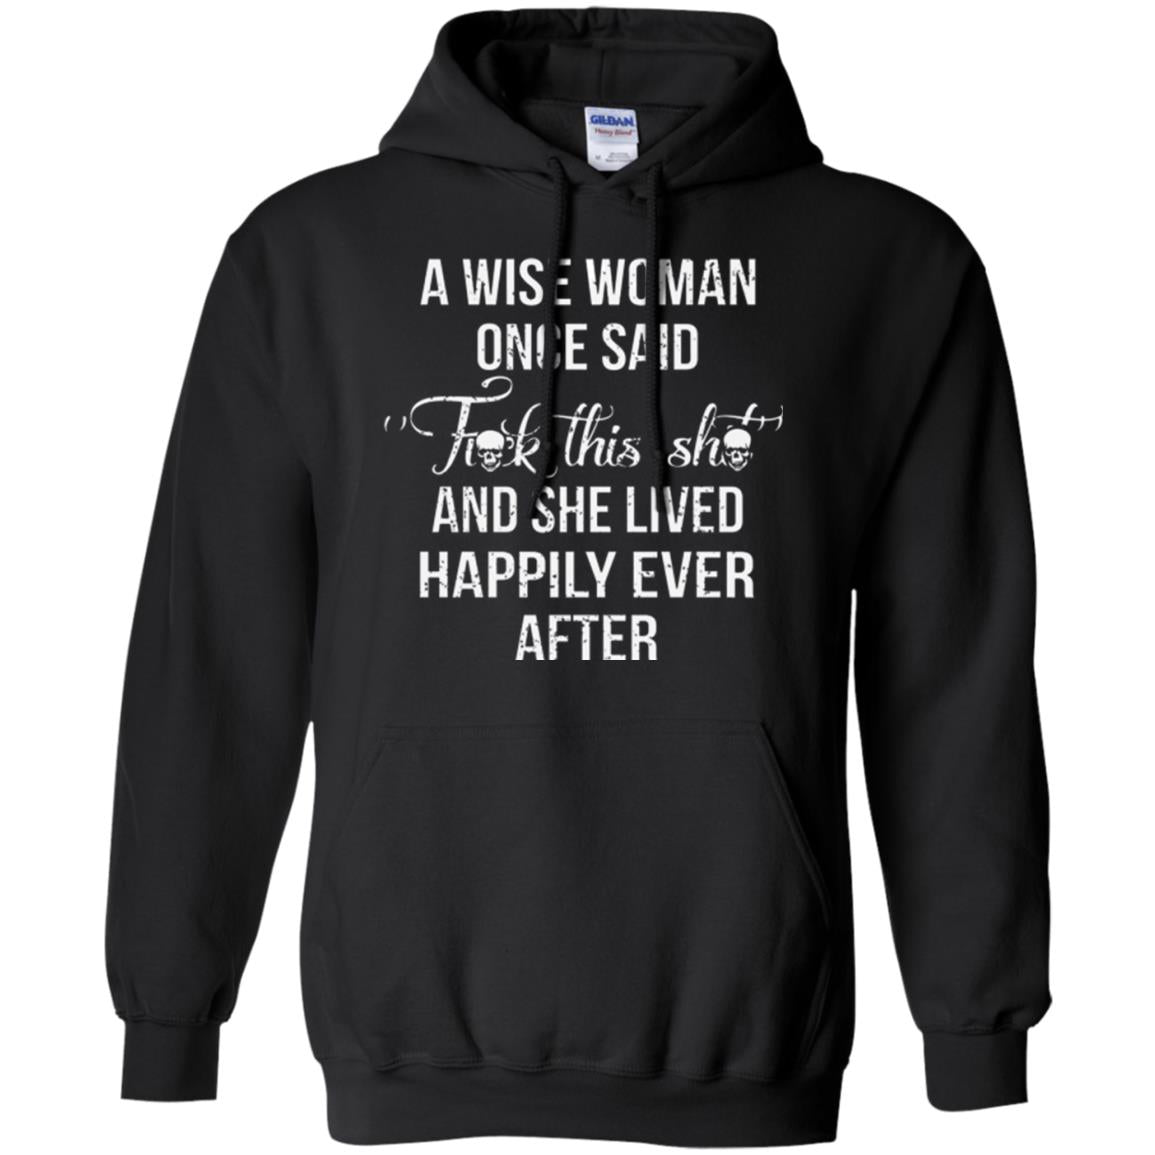 A Wise Woman Once Said And She Lived Happily Eer After T-shirt